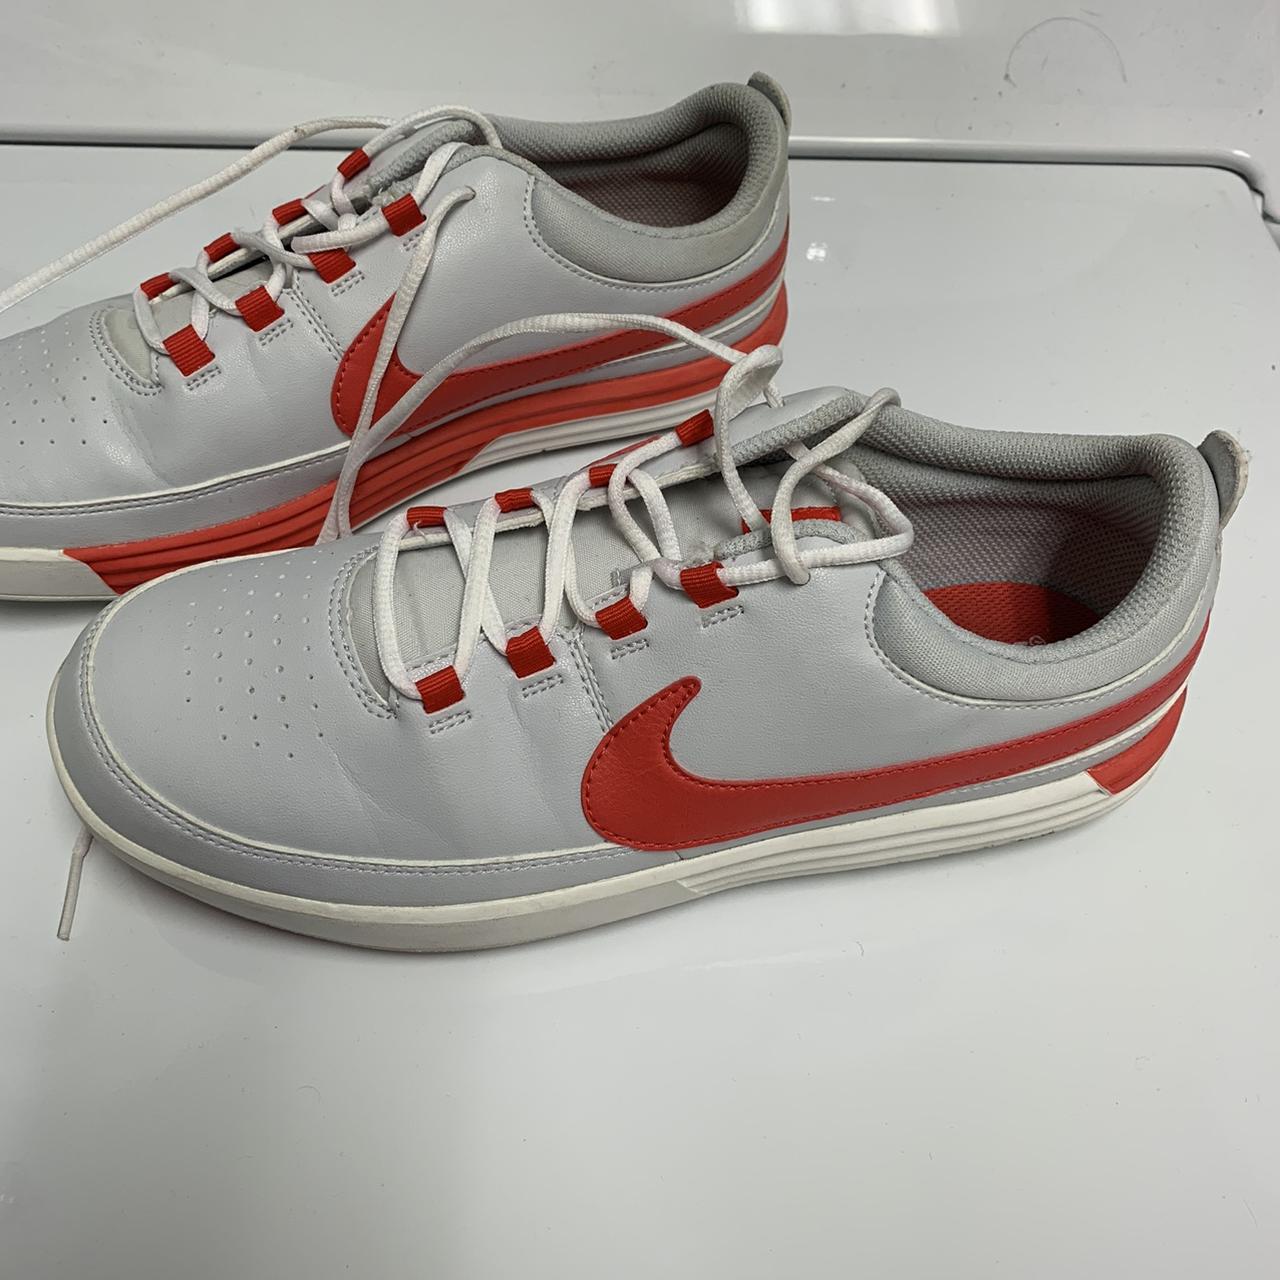 GREY PINK/RED NIKE SHOES